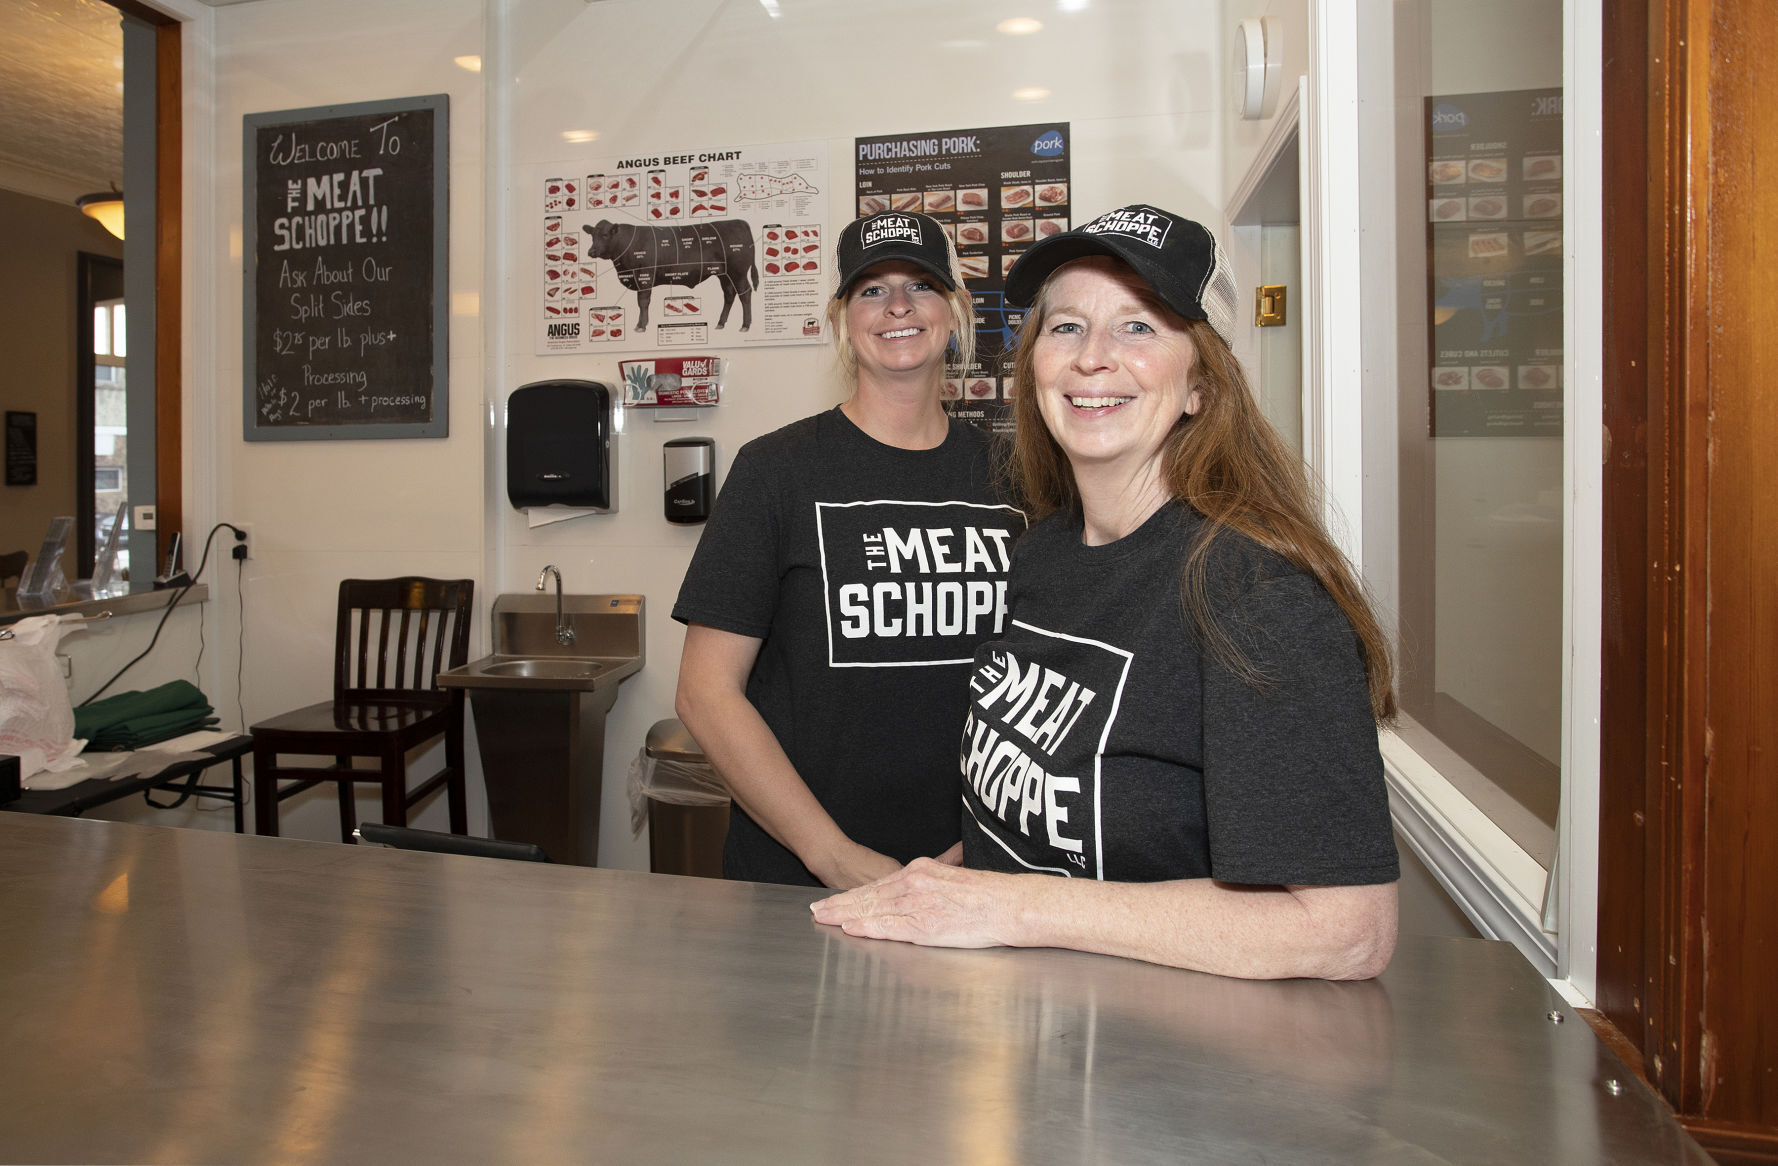 Owner Keri Retallick and her daughter Kelsi stand at the sales counter in The Meat Schoppe in Lancaster, Wis., on Thursday, May 27, 2021. PHOTO CREDIT: Stephen Gassman